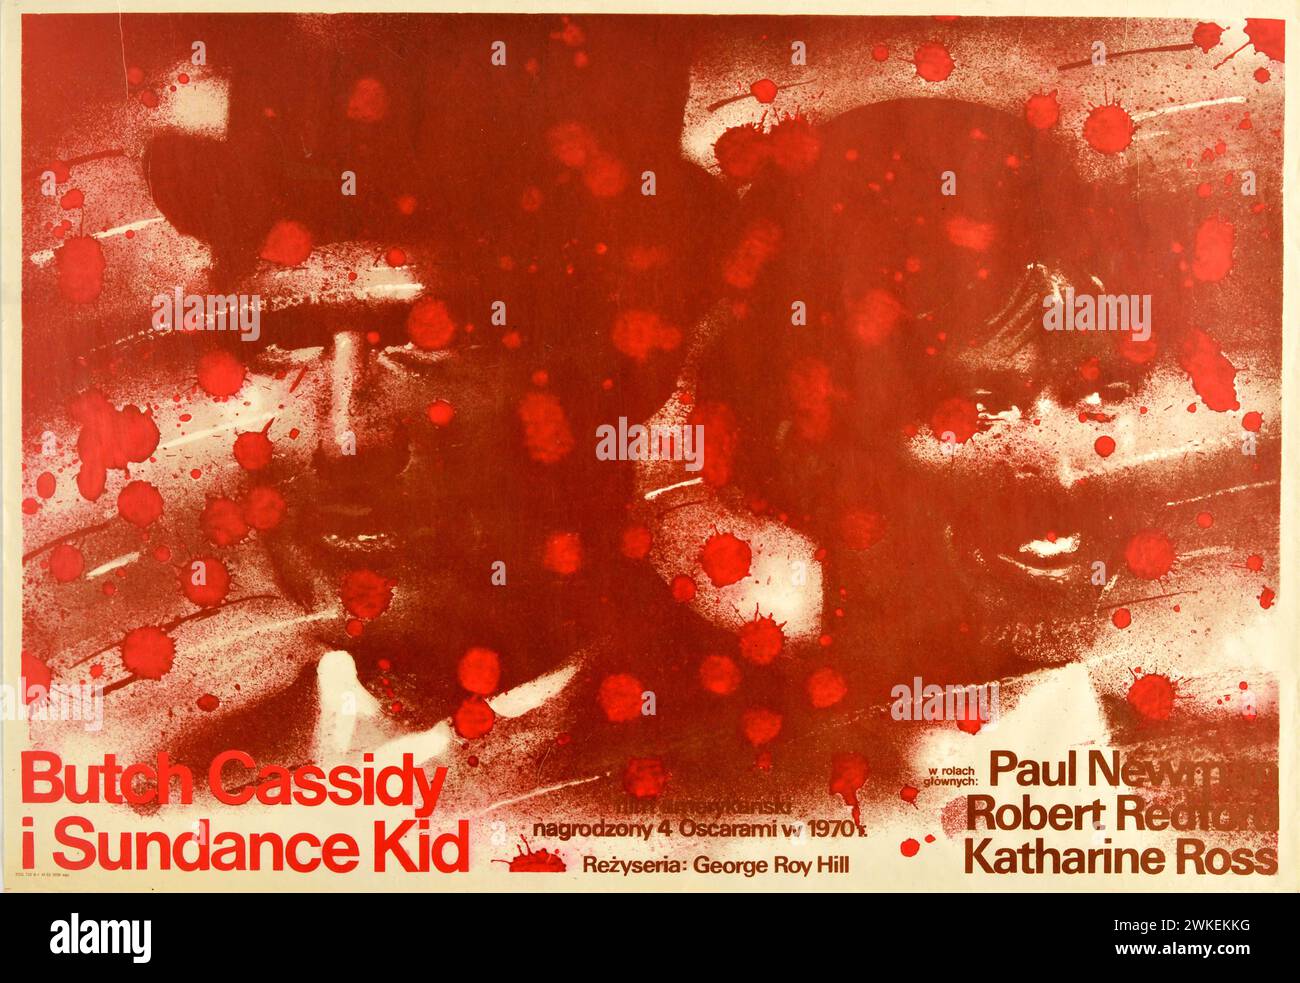 Movie poster 'Butch Cassidy and the Sundance Kid' by George Roy Hill. Museum: PRIVATE COLLECTION. Author: Waldemar Swierzy. Stock Photo